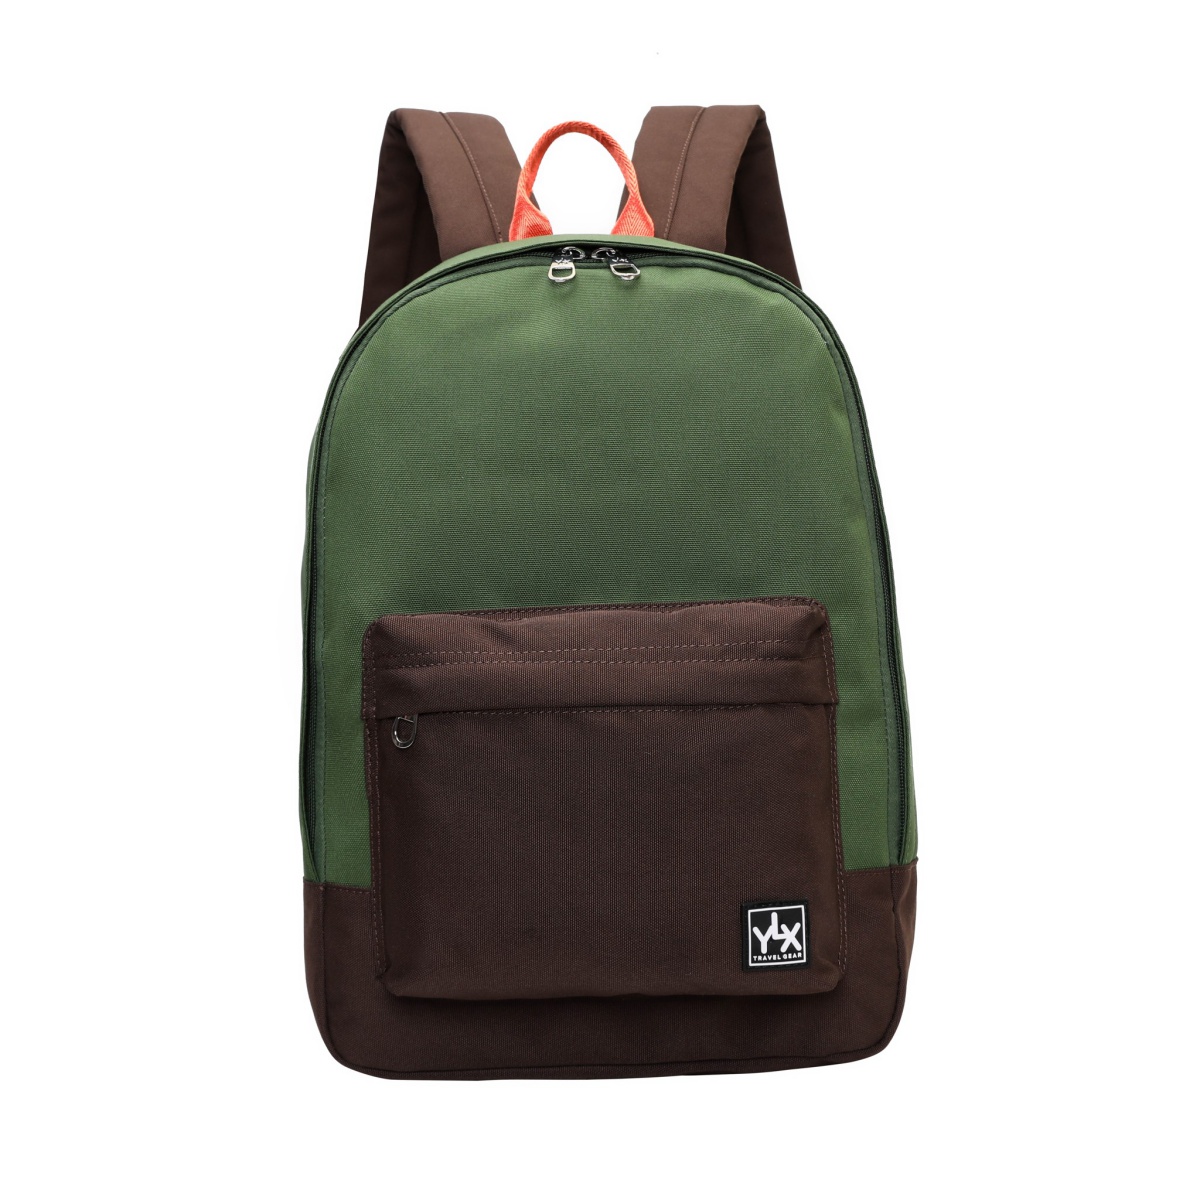 YLX Classic Backpack